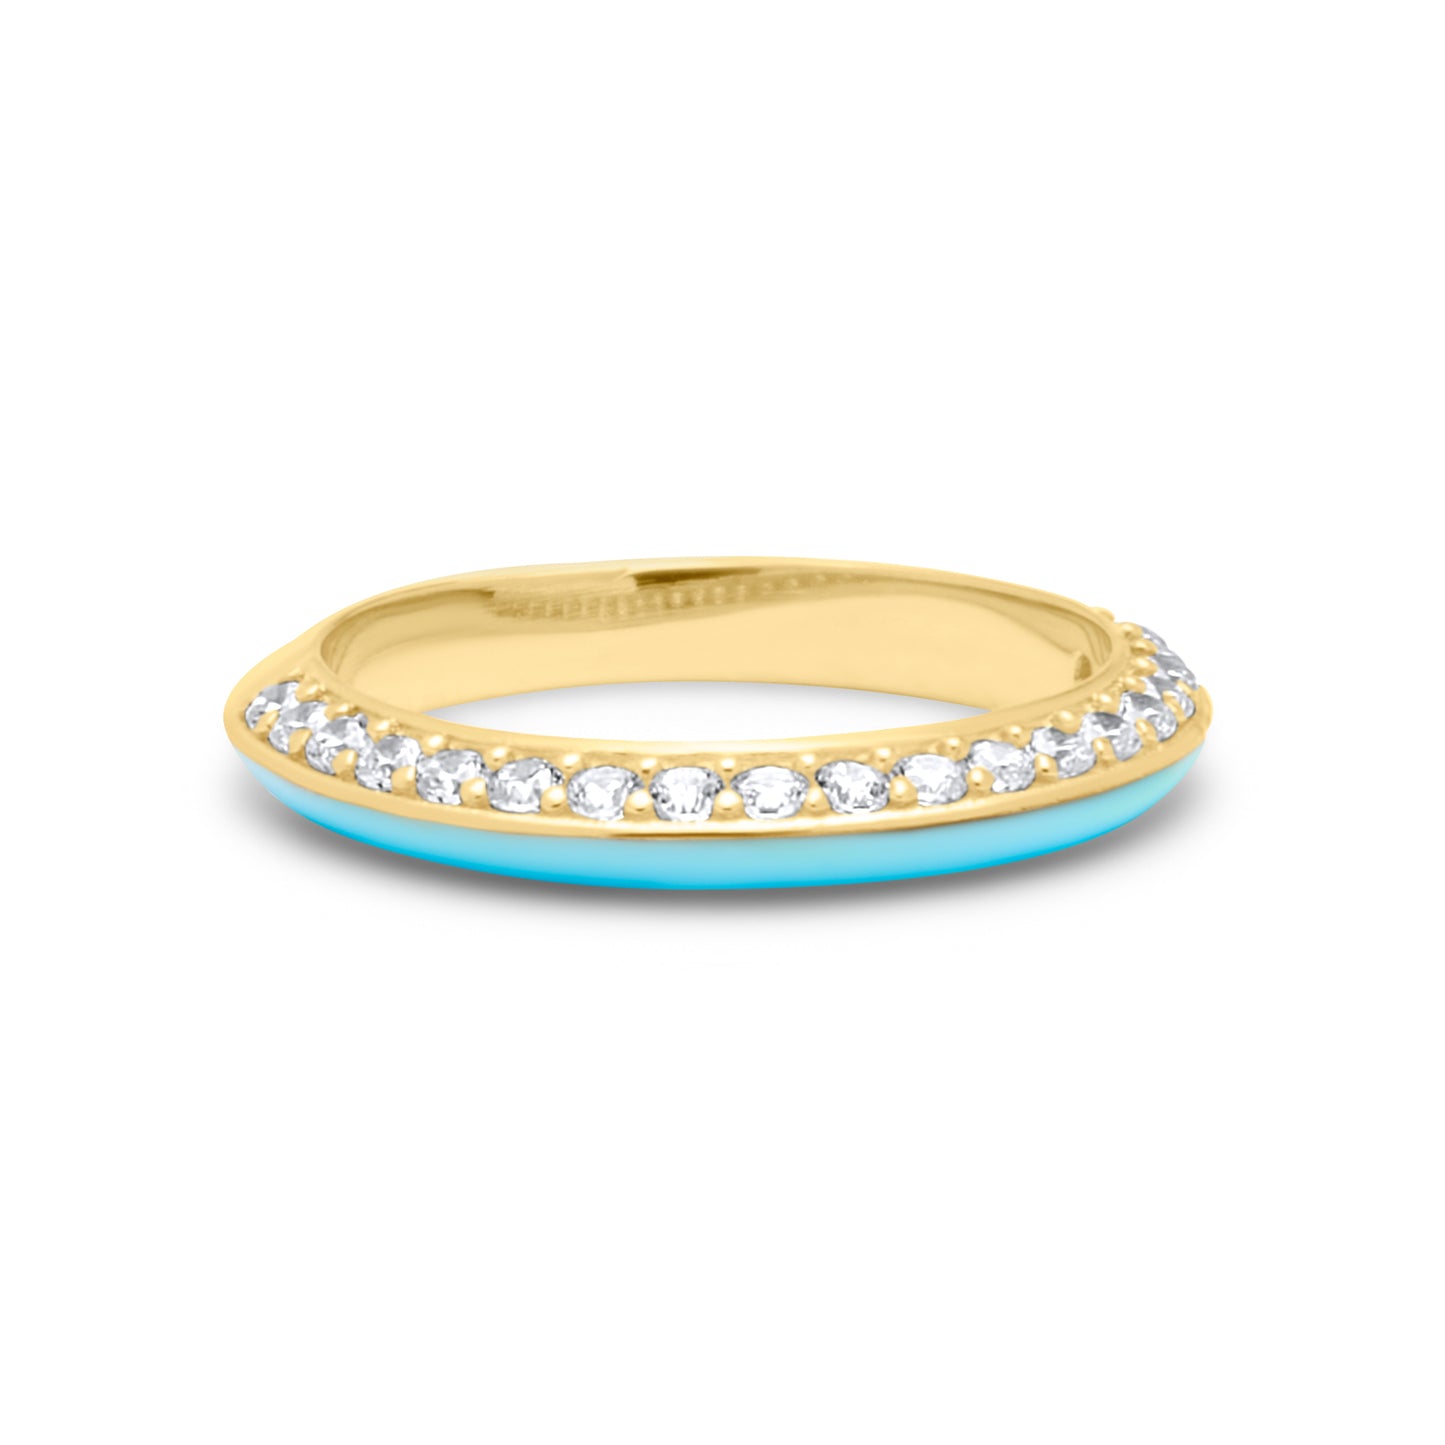 Turquoise One Side Stones Ring - Gold Plated